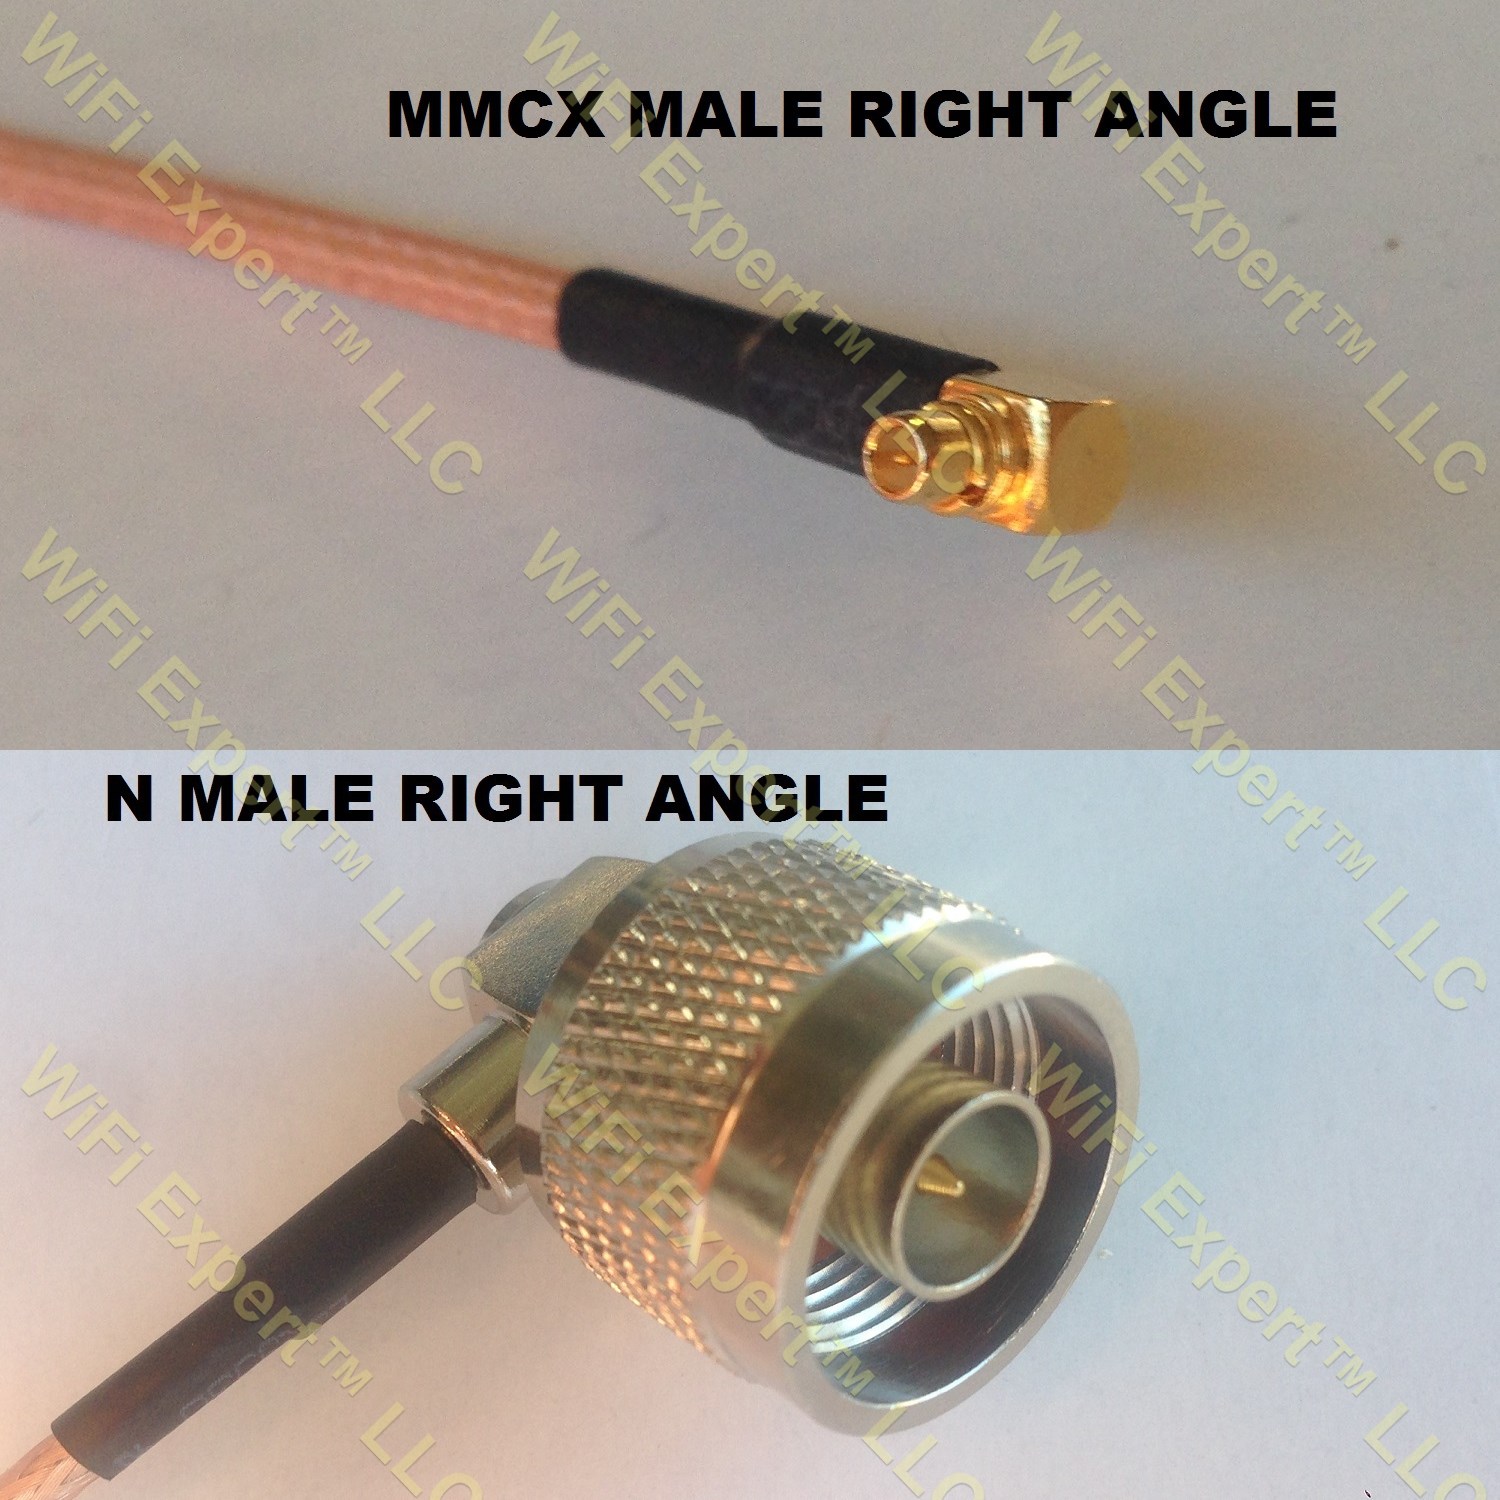 USA-CA LMR100 BNC MALE ANGLE to RCA MALE Coaxial RF Pigtail Cable 